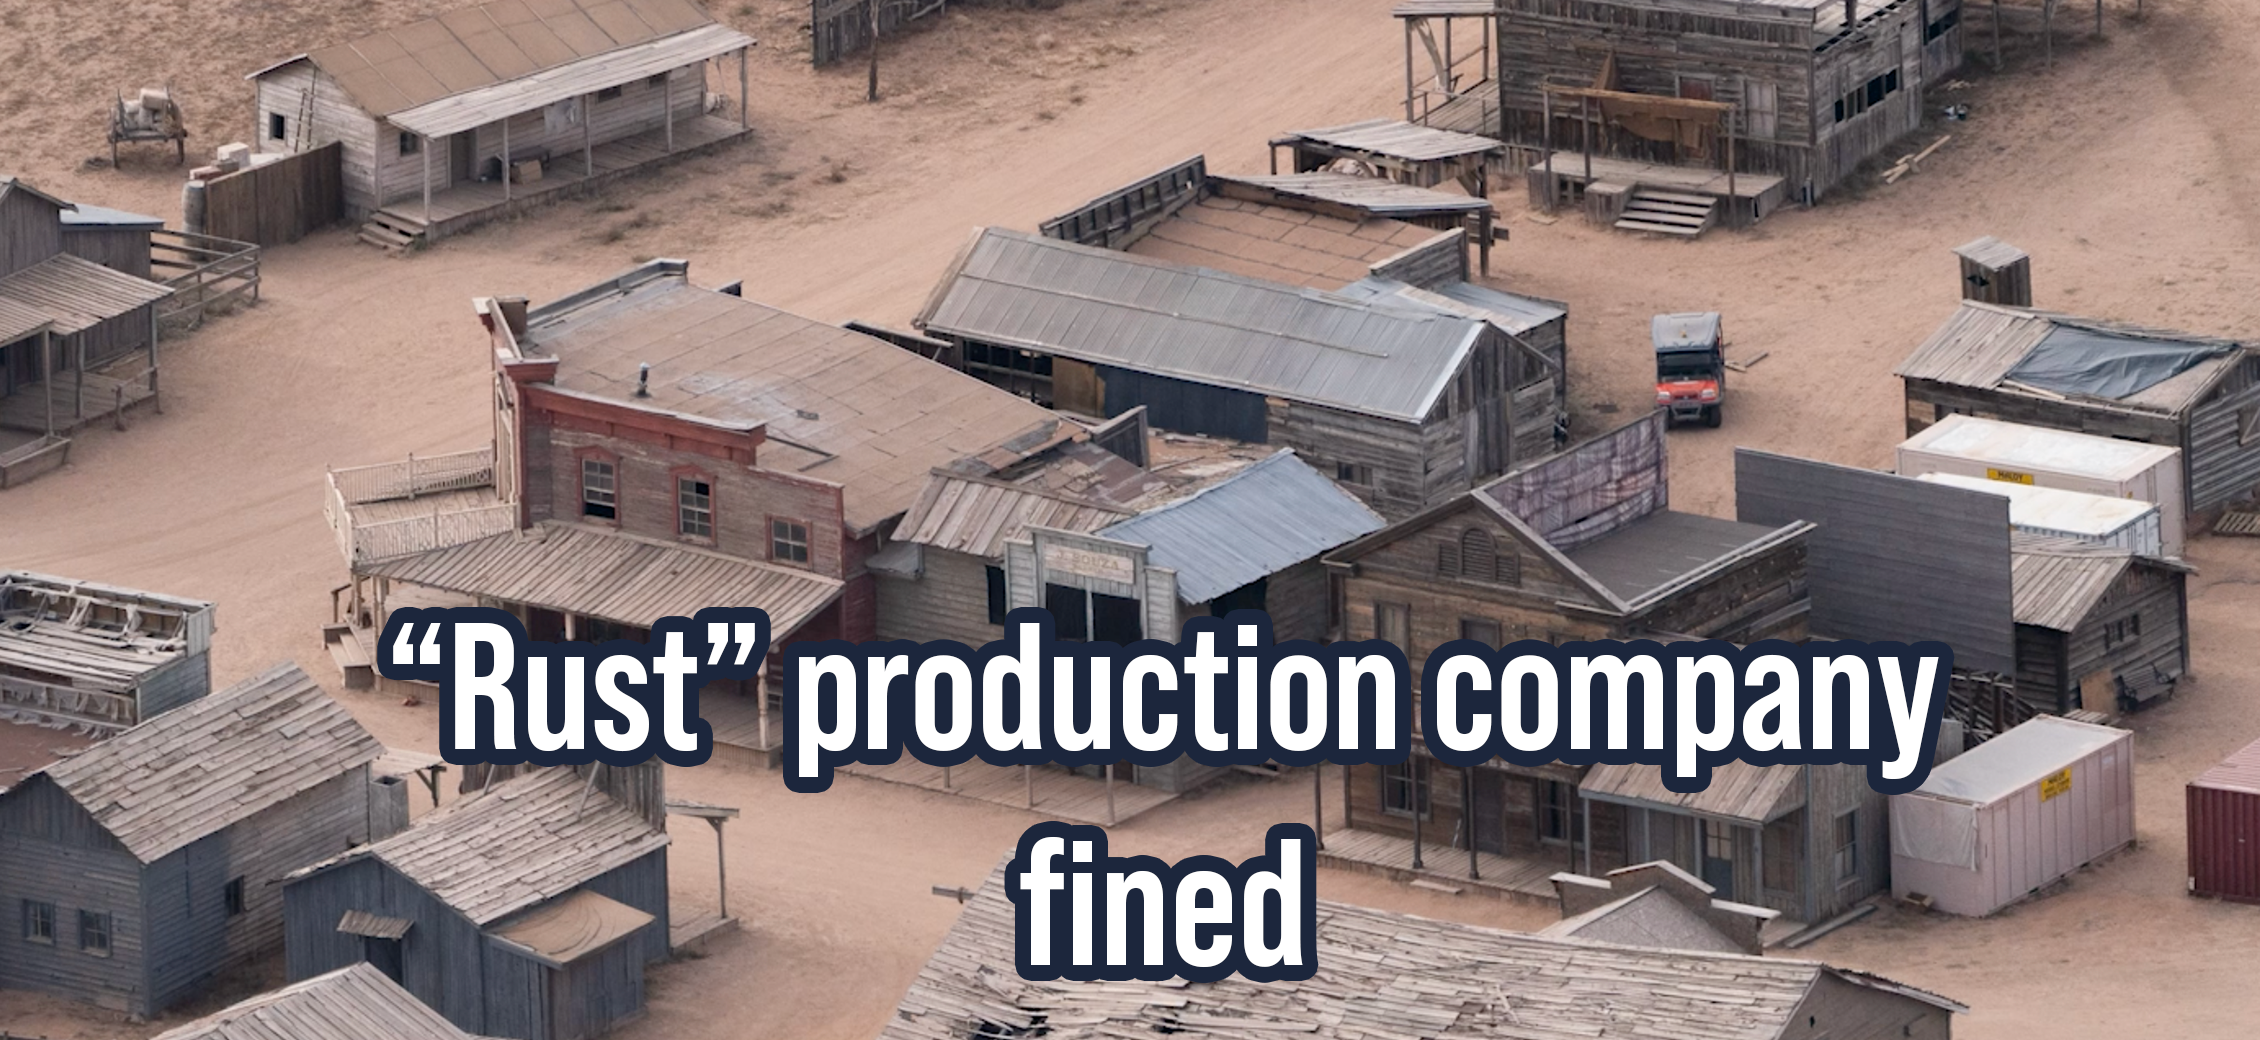 Rust production company fined